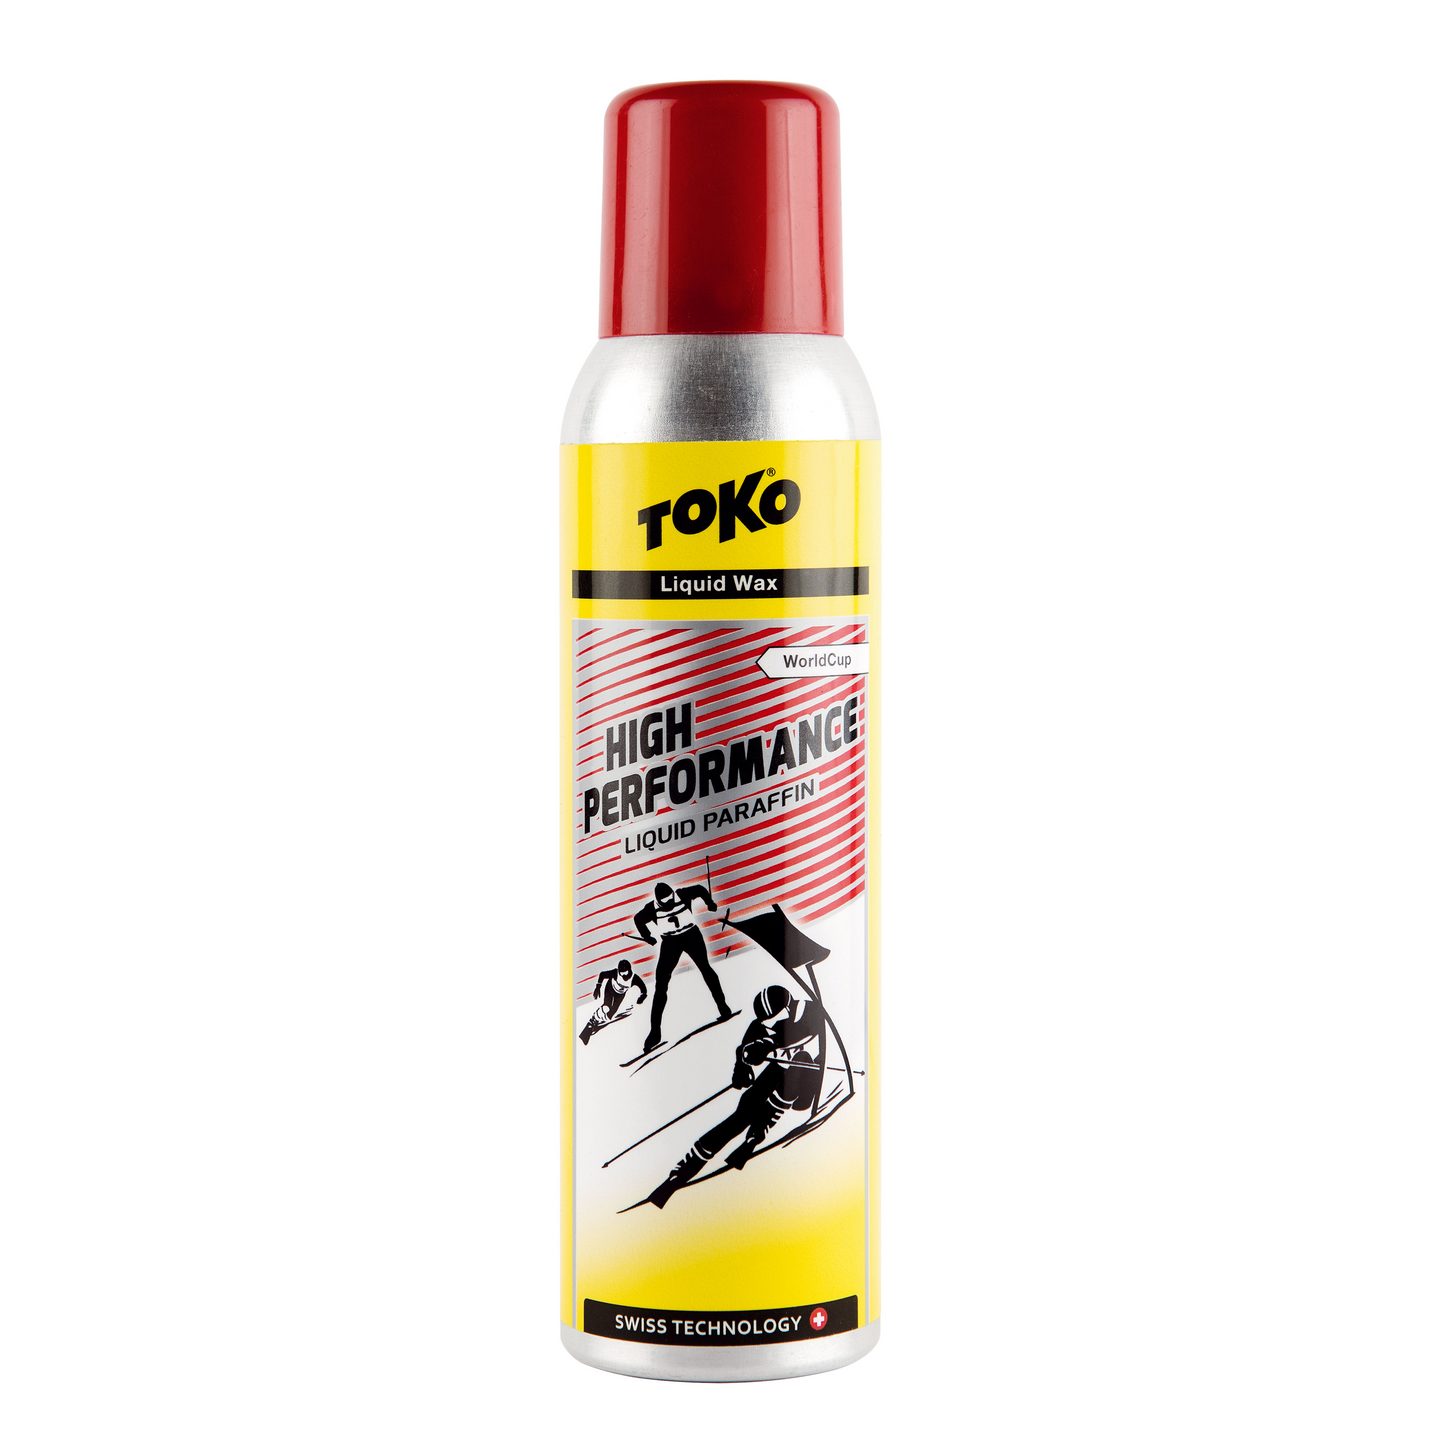 A product picture of the Toko High Performance Liquid Paraffin Red